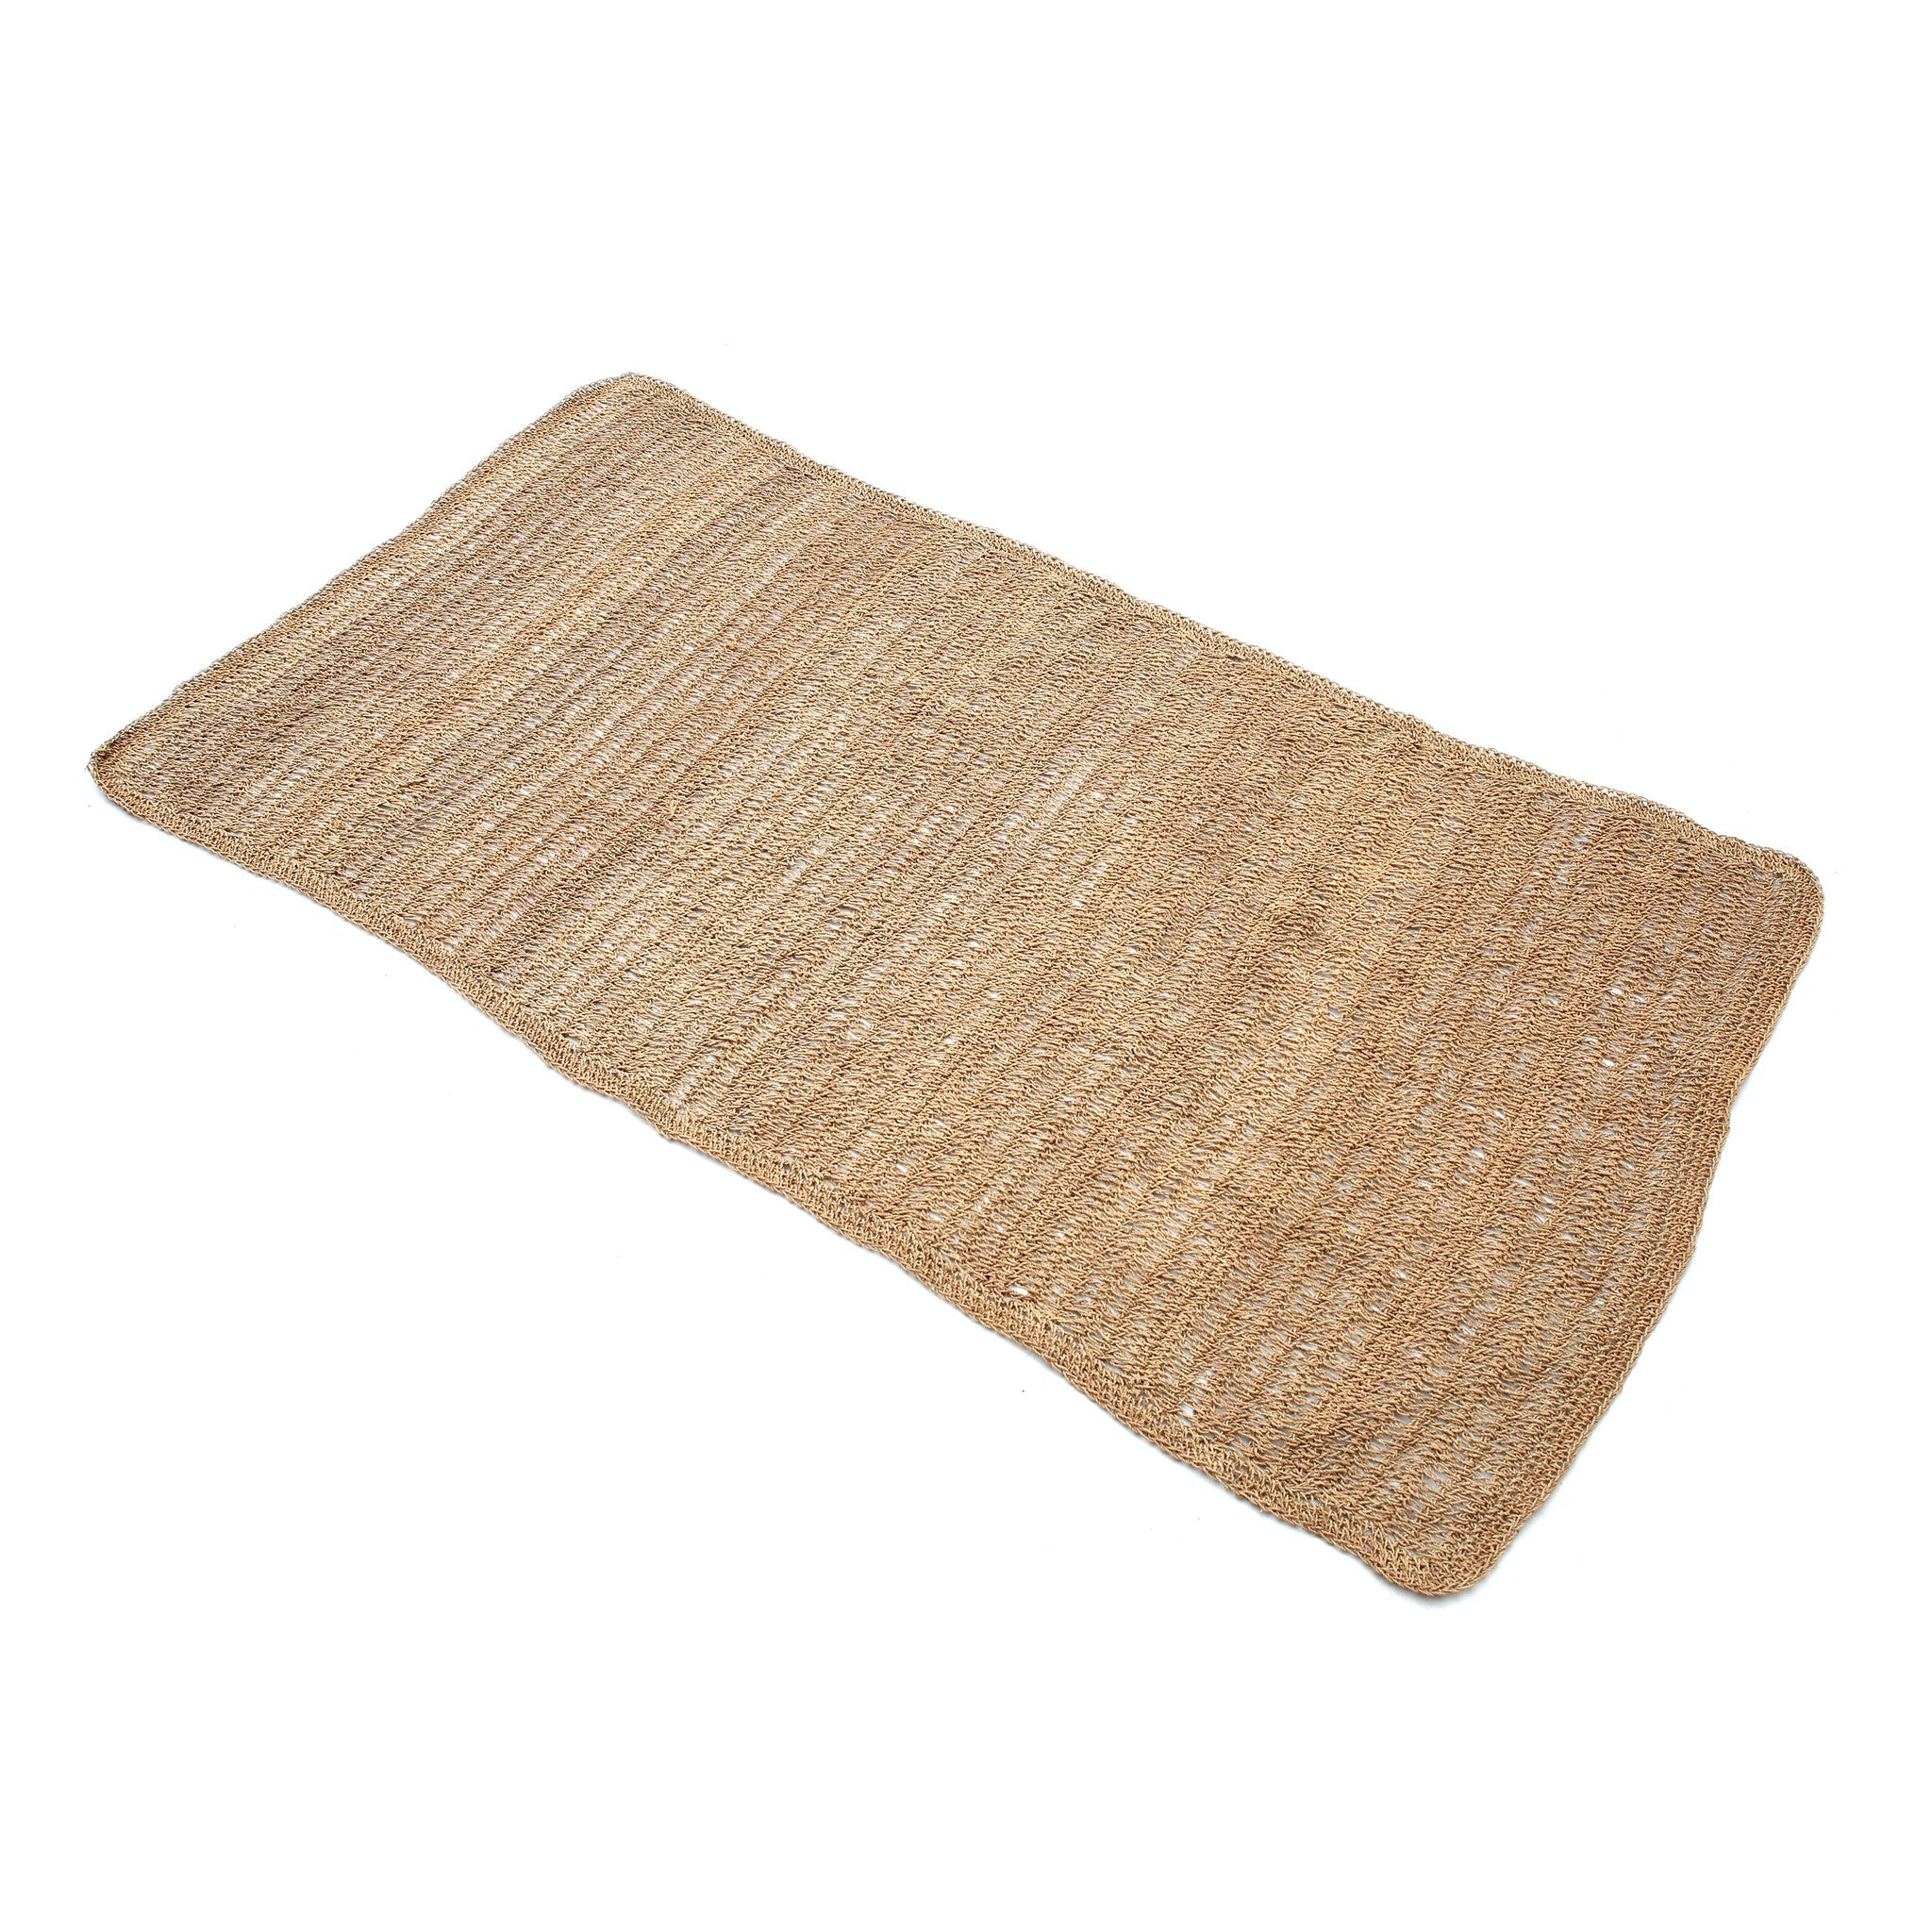 The Seagrass Rug - Natural - 200x300